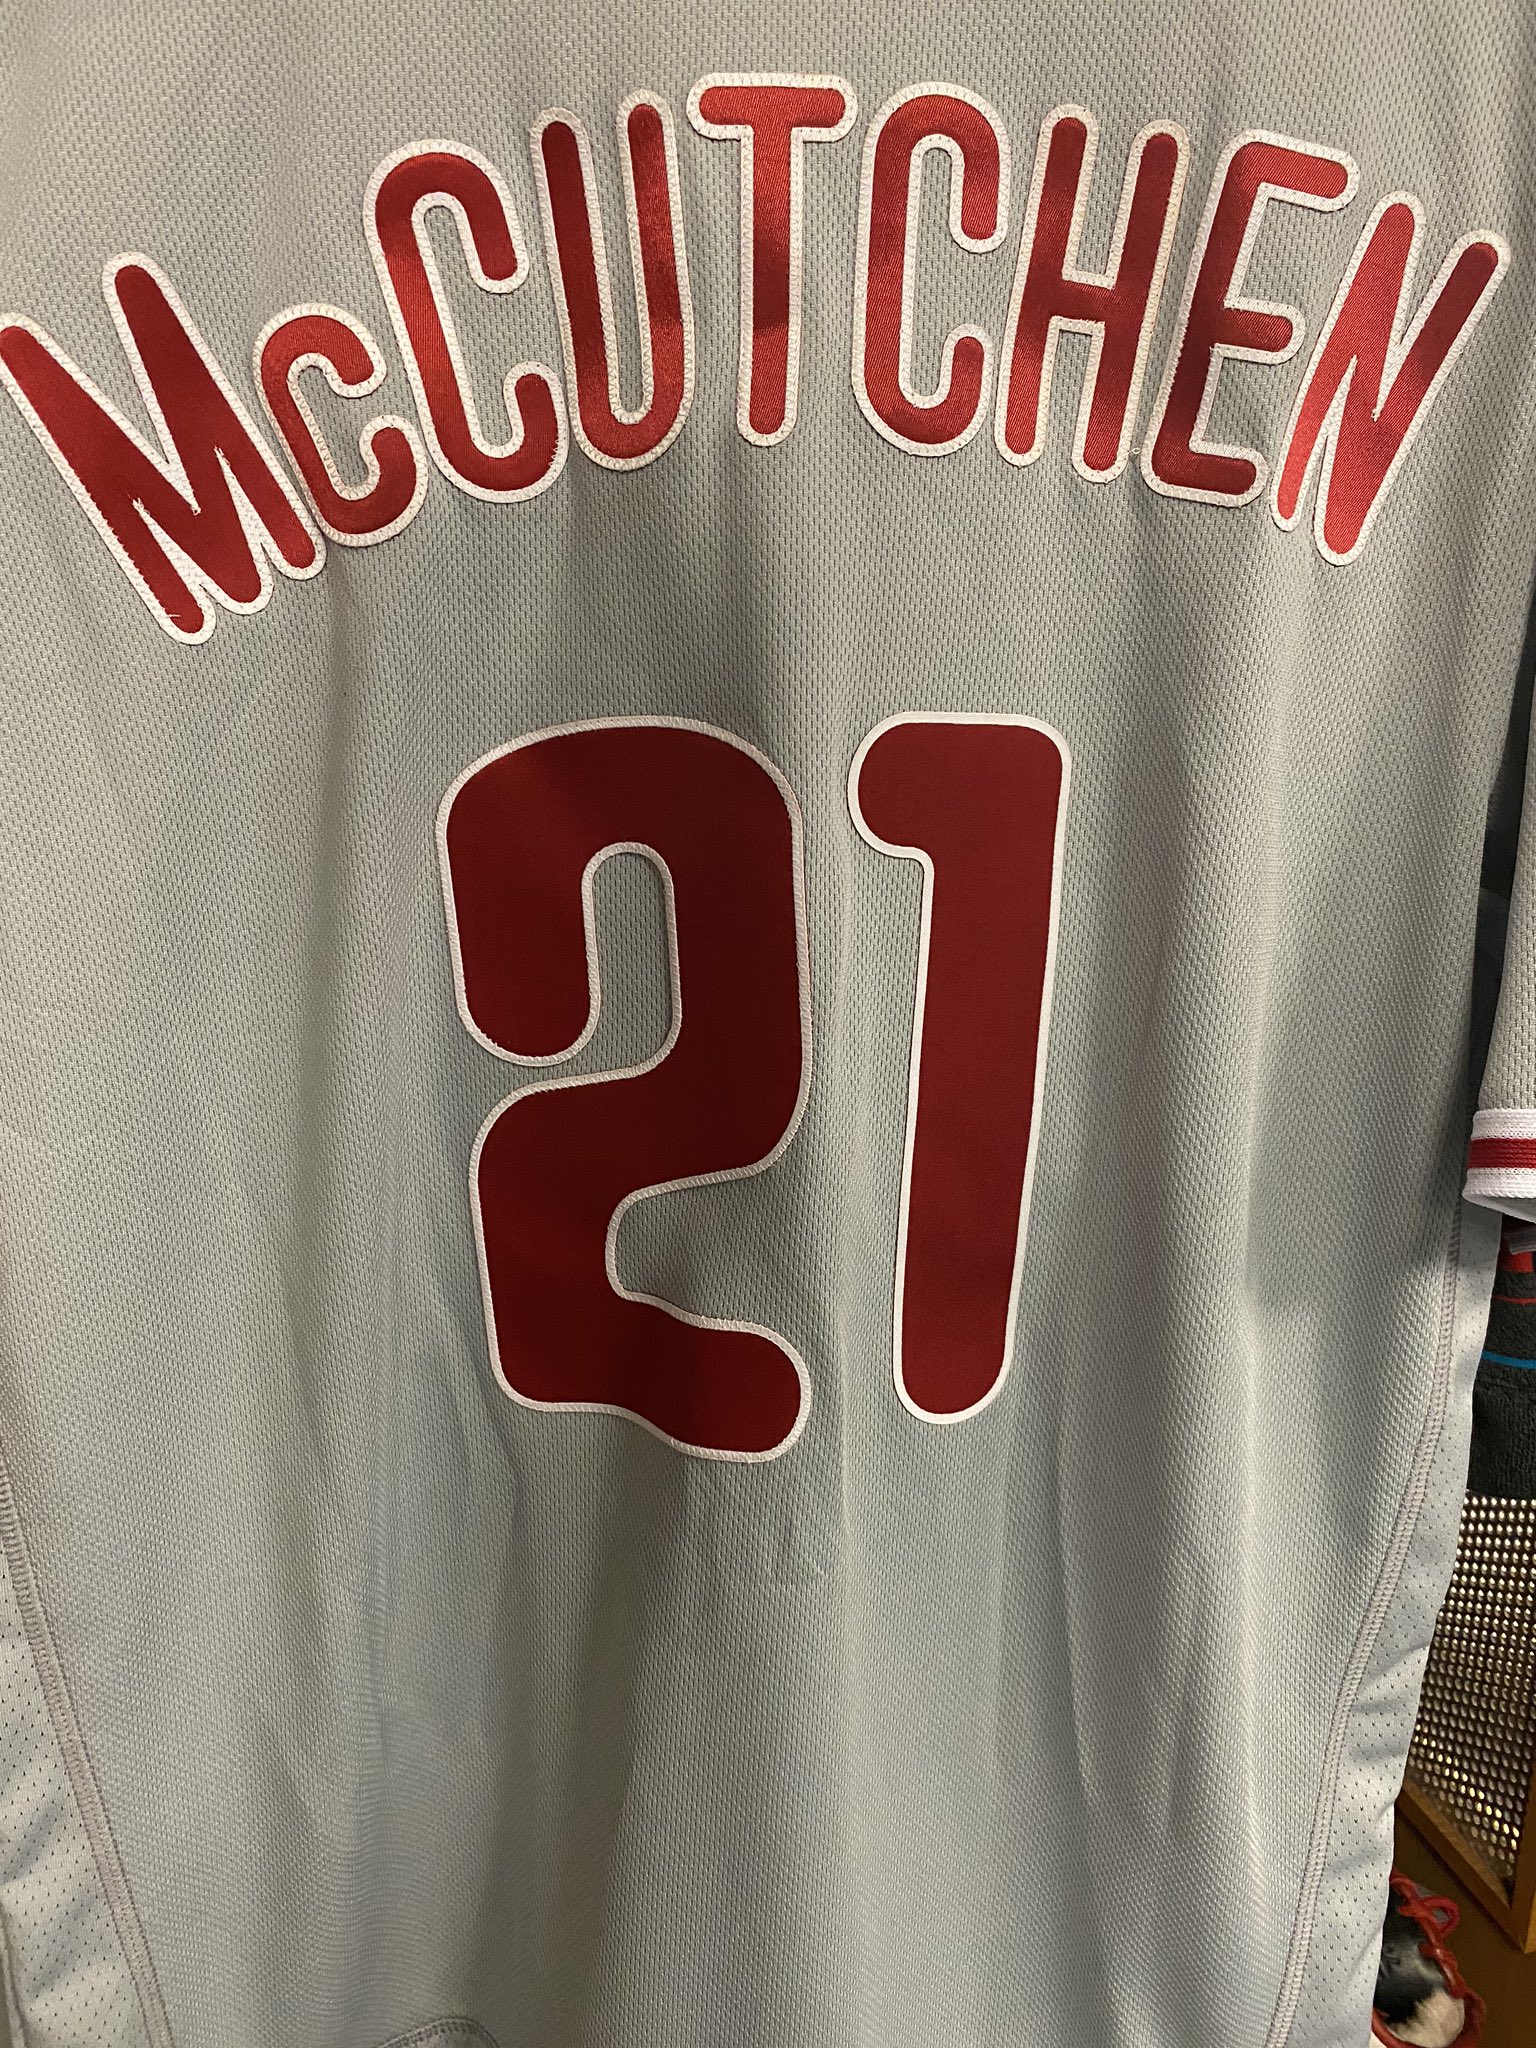 Andrew McCutchen on X: Def an honor to wear #21 tonight! I feel a